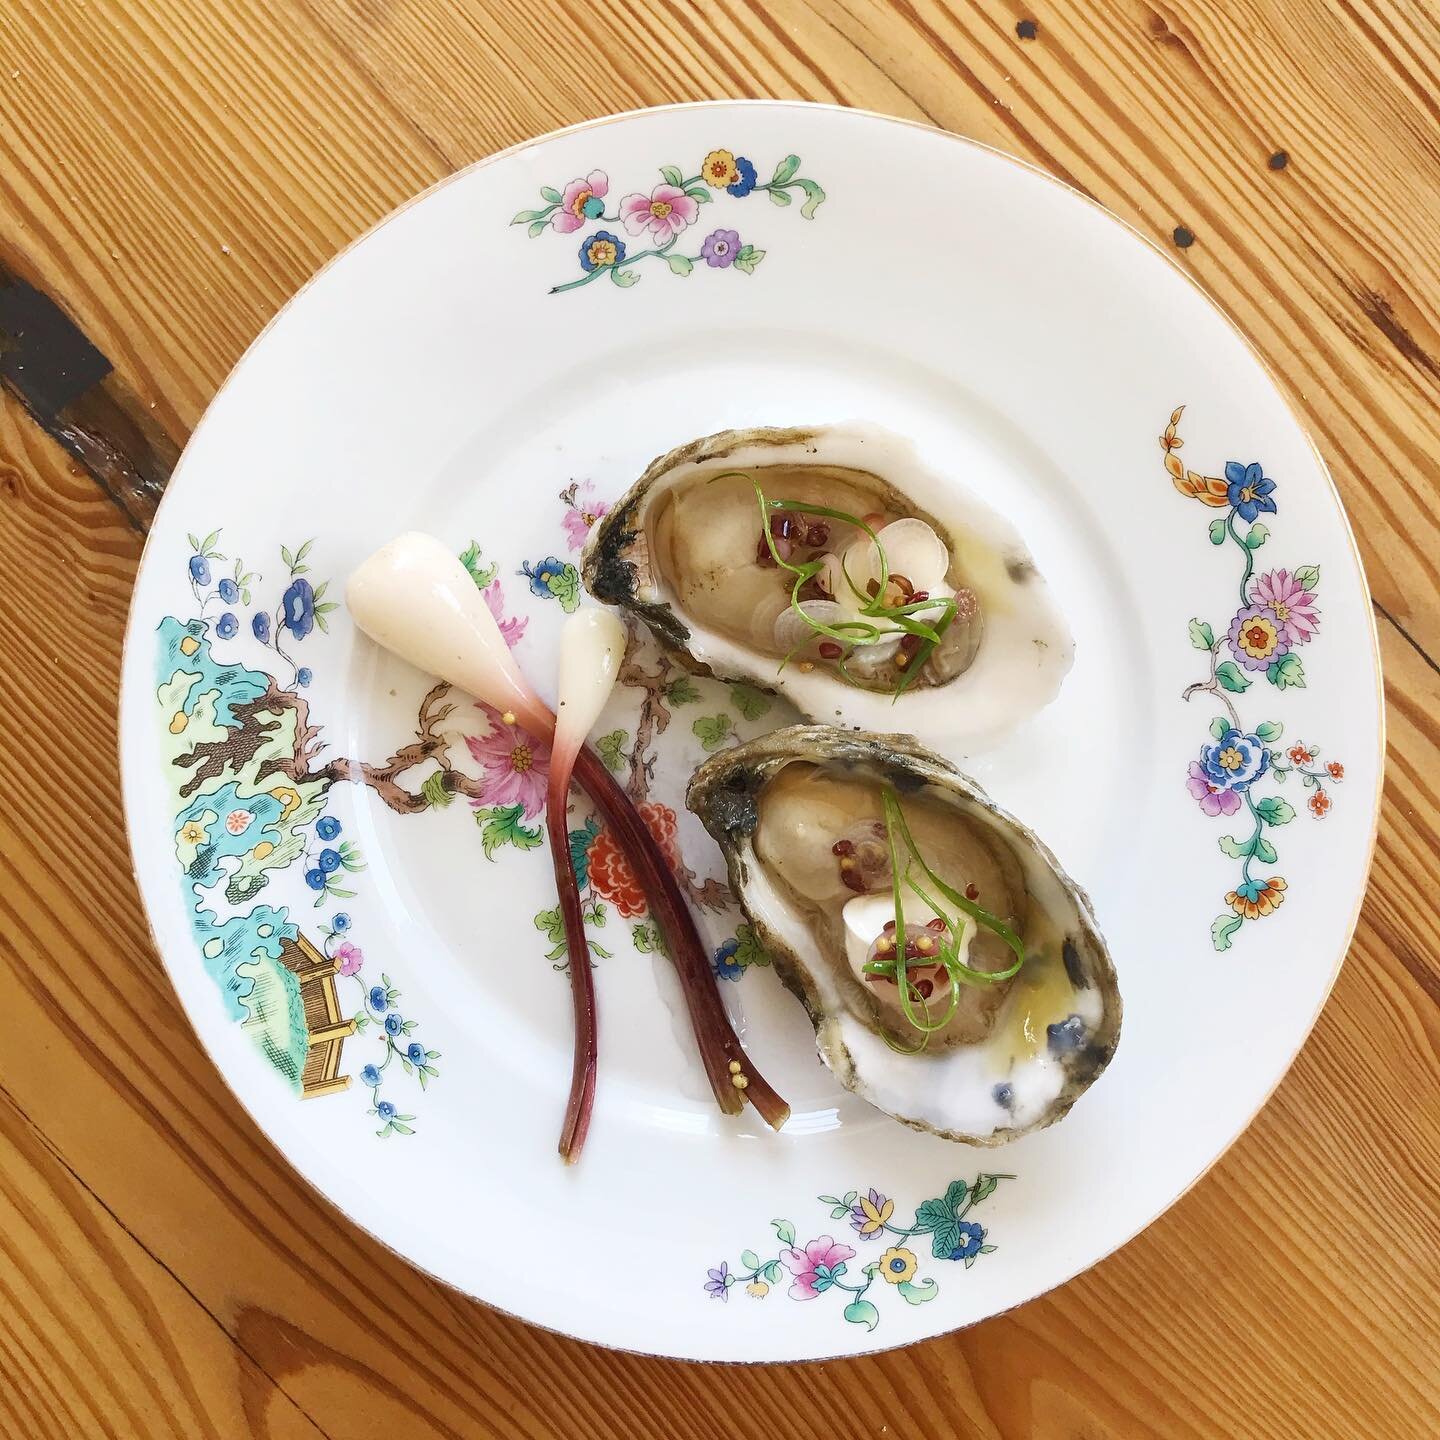 https://images.squarespace-cdn.com/content/v1/5a9eec779772aeecca58eb94/1590163344248-XD7D9WTFM8E4T2OTI0UA/Oysters+with+mignonette.jpg